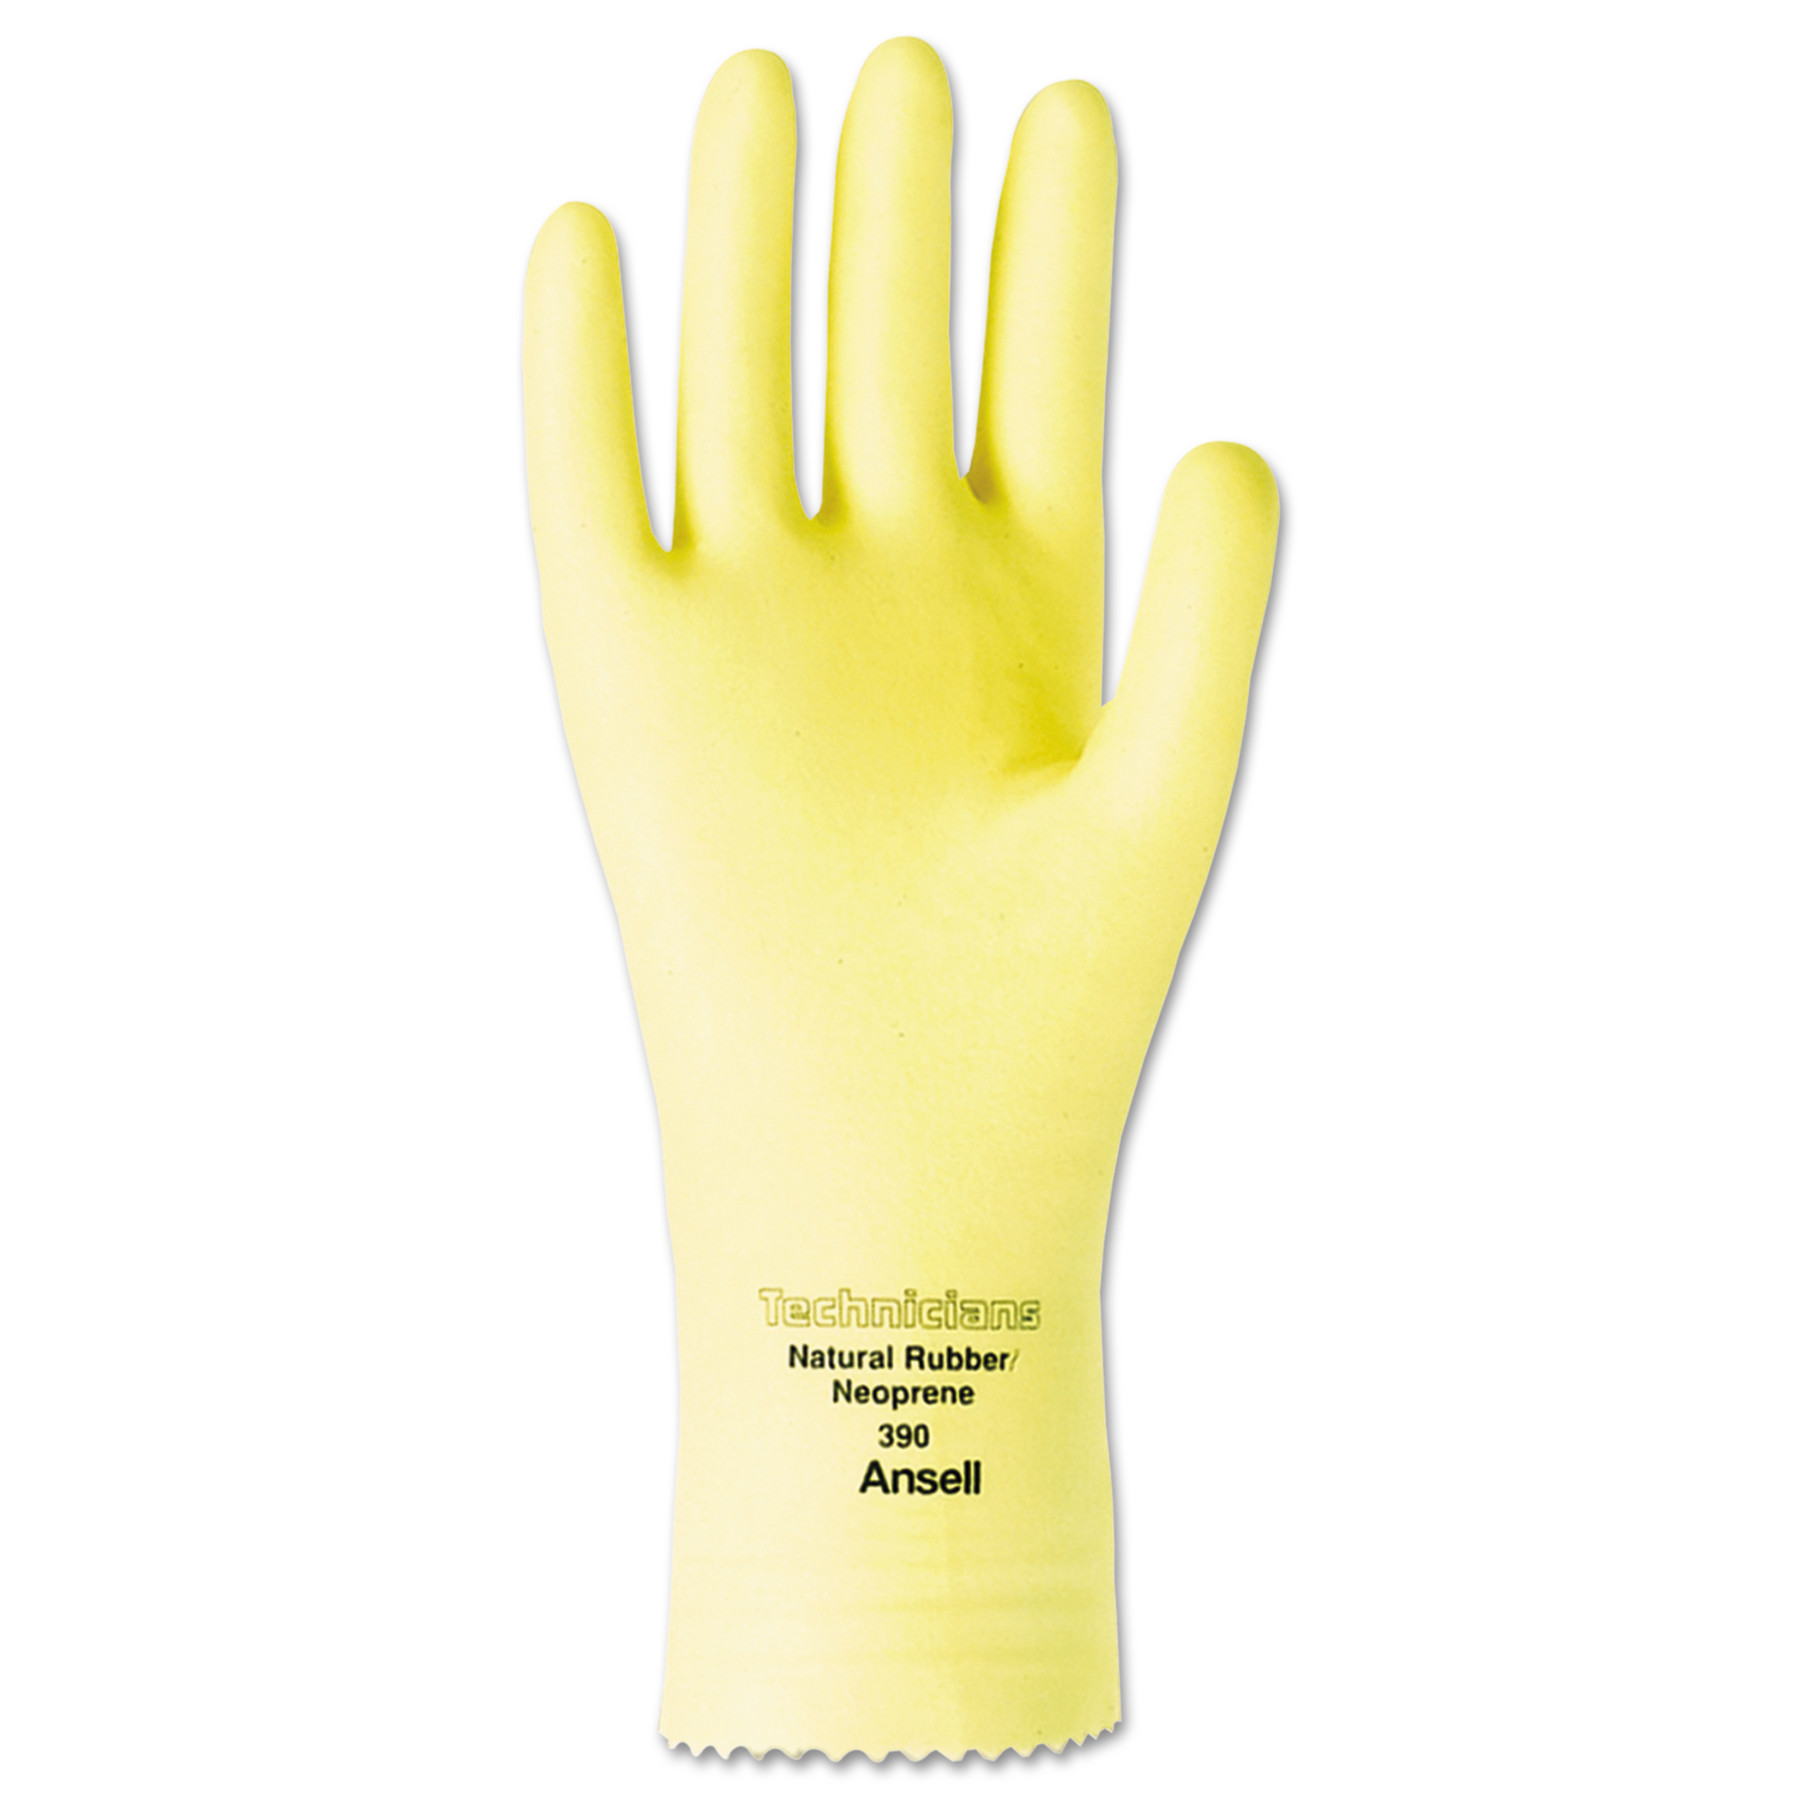  AnsellPro 103140 Technicians Latex/Neoprene Blend Gloves, Size 7, 12 Pairs (ANS3907) 